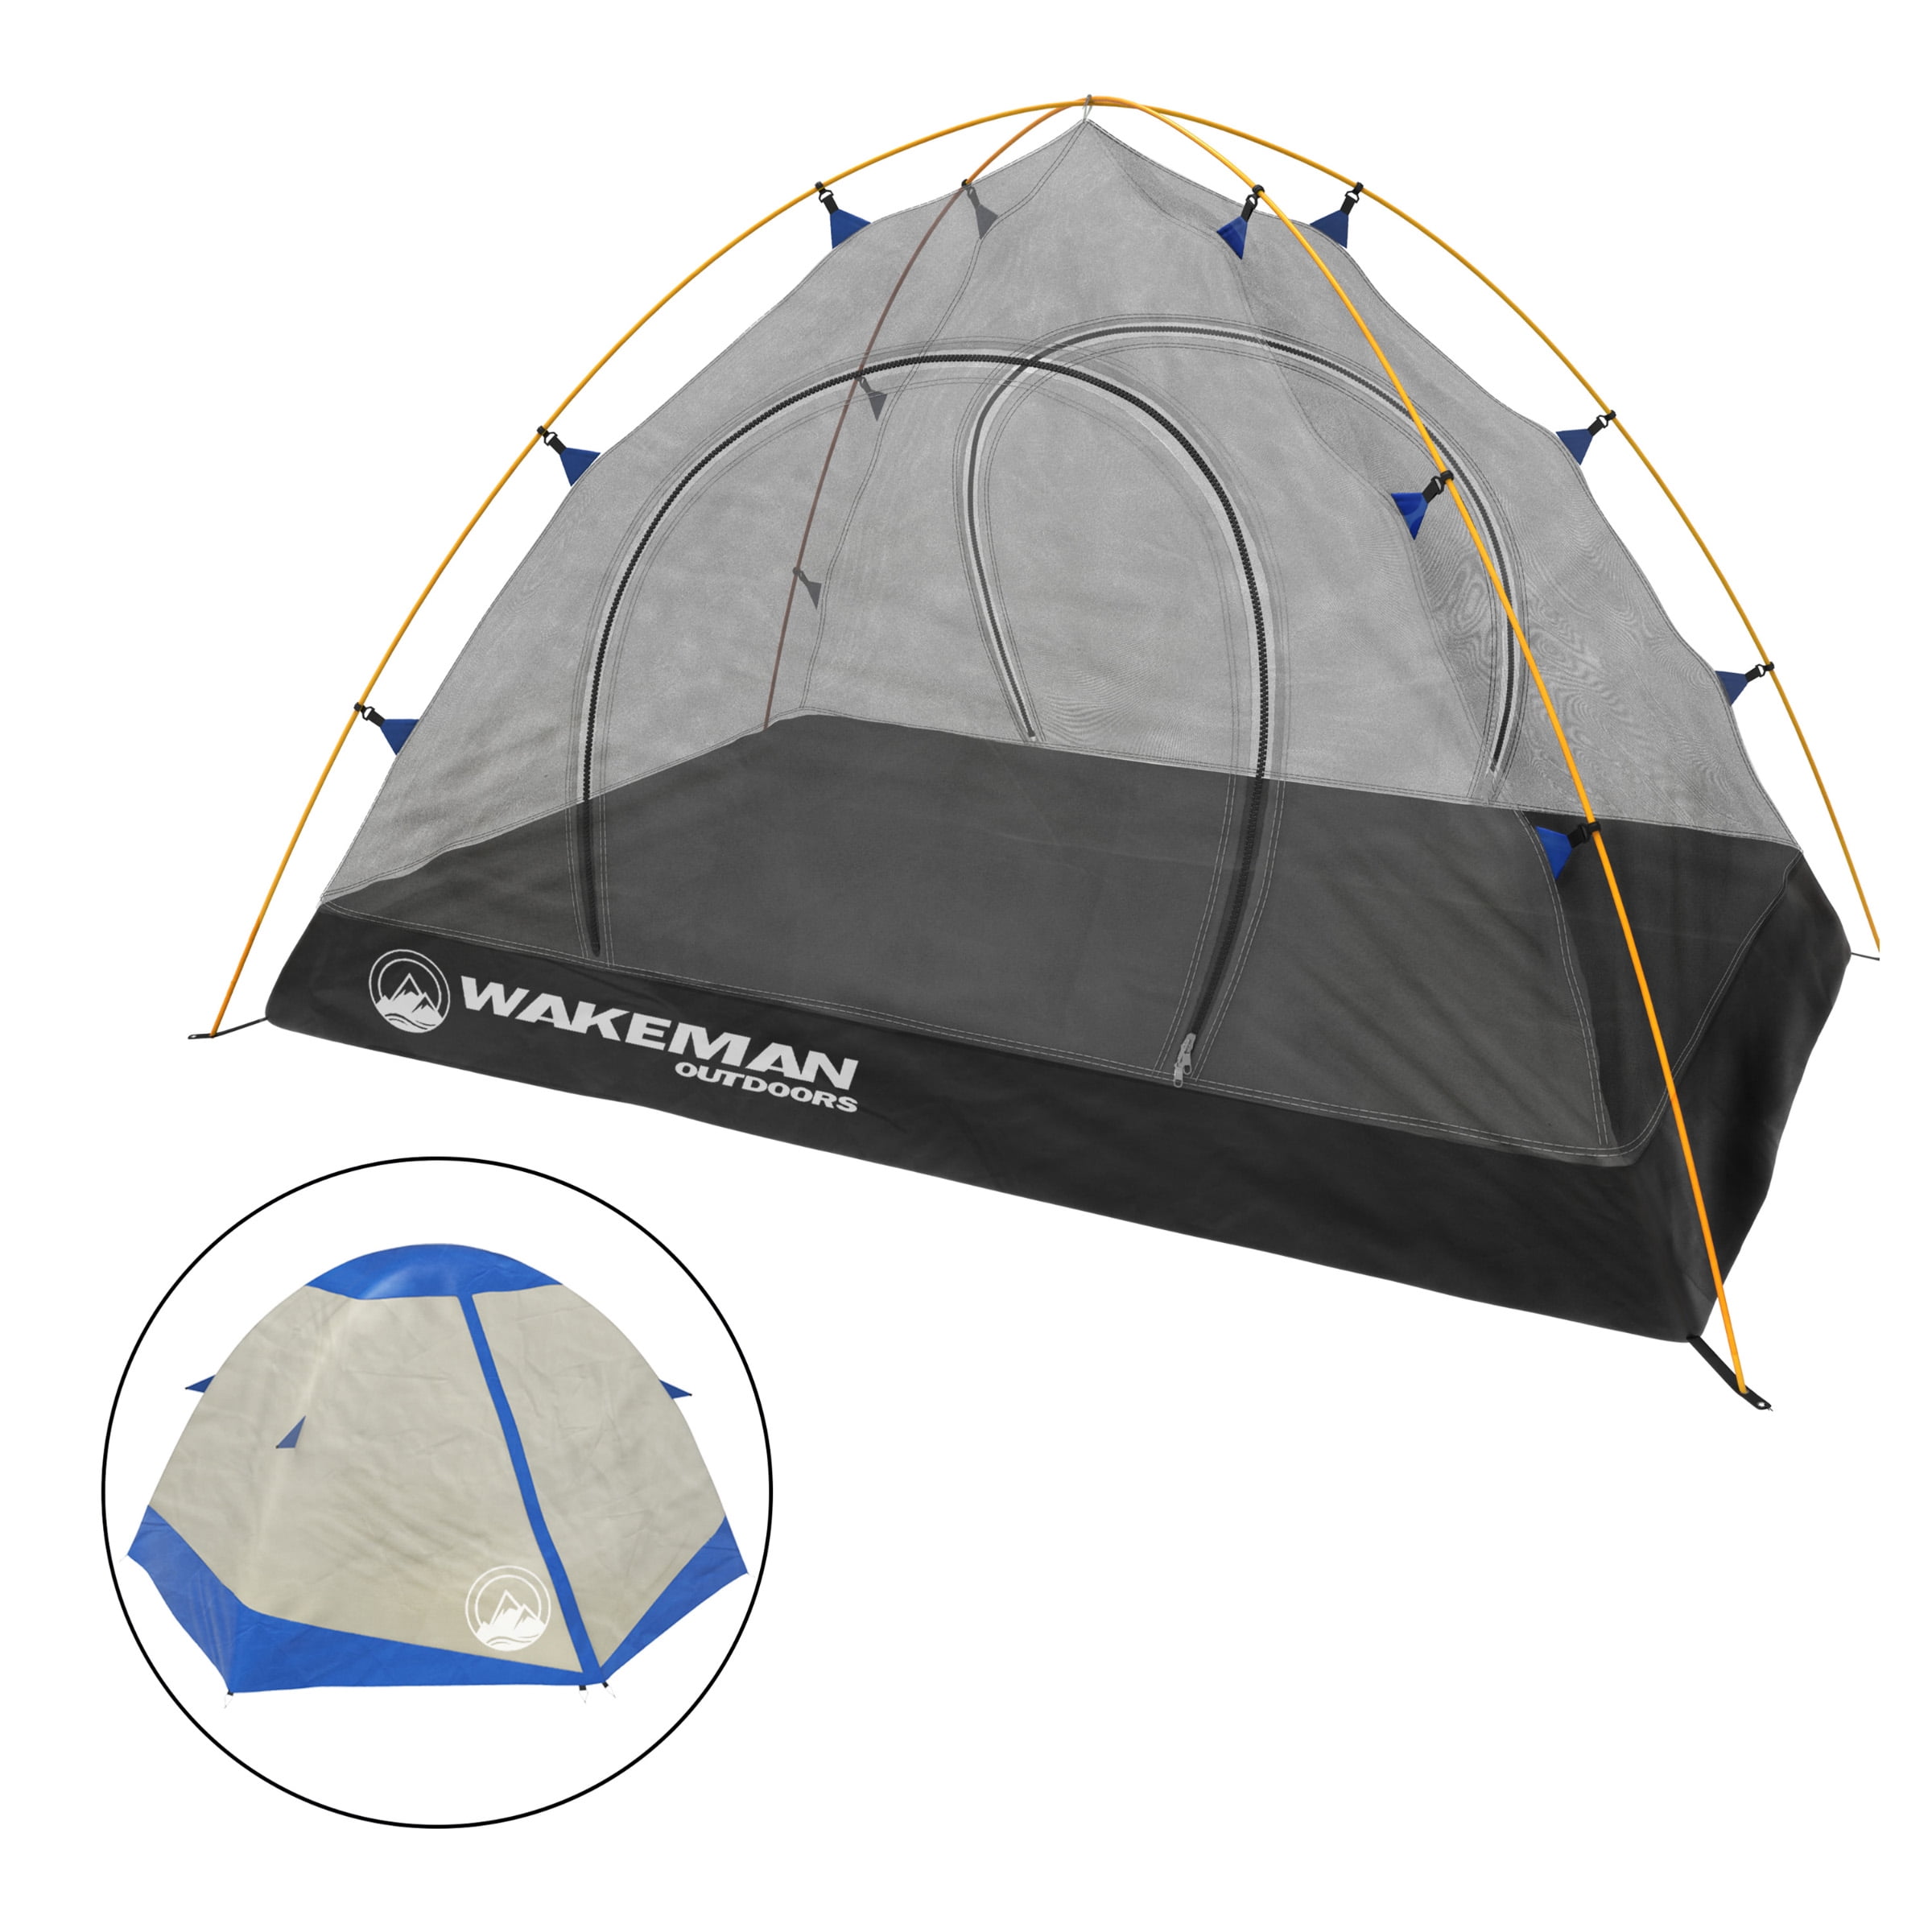 2-Person Backpacking Tent- Waterproof Floor ＆ Rain Fly, Taped Seams ＆ Carry  Bag- Lightweight for Backcountry Camping ＆ Hiking by Wakeman Outdoors テント